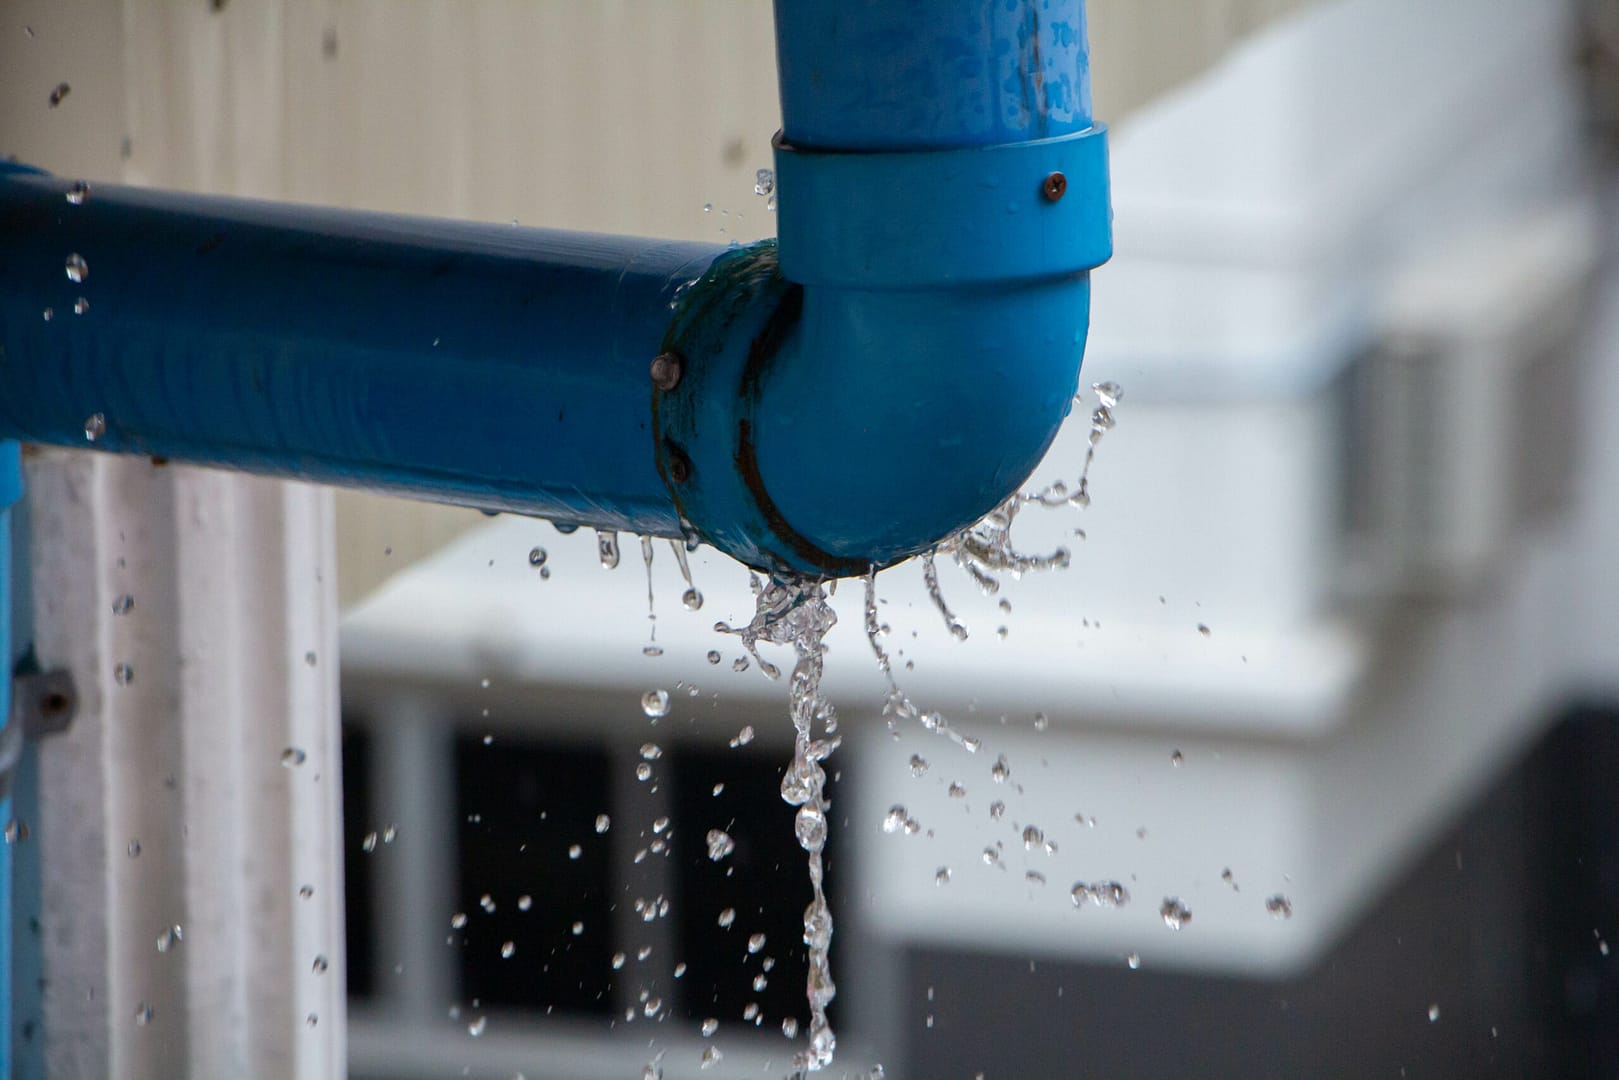 Close-up shot of water leaking and splashing from a plastic pipe, creating dynamic and fluid motion.